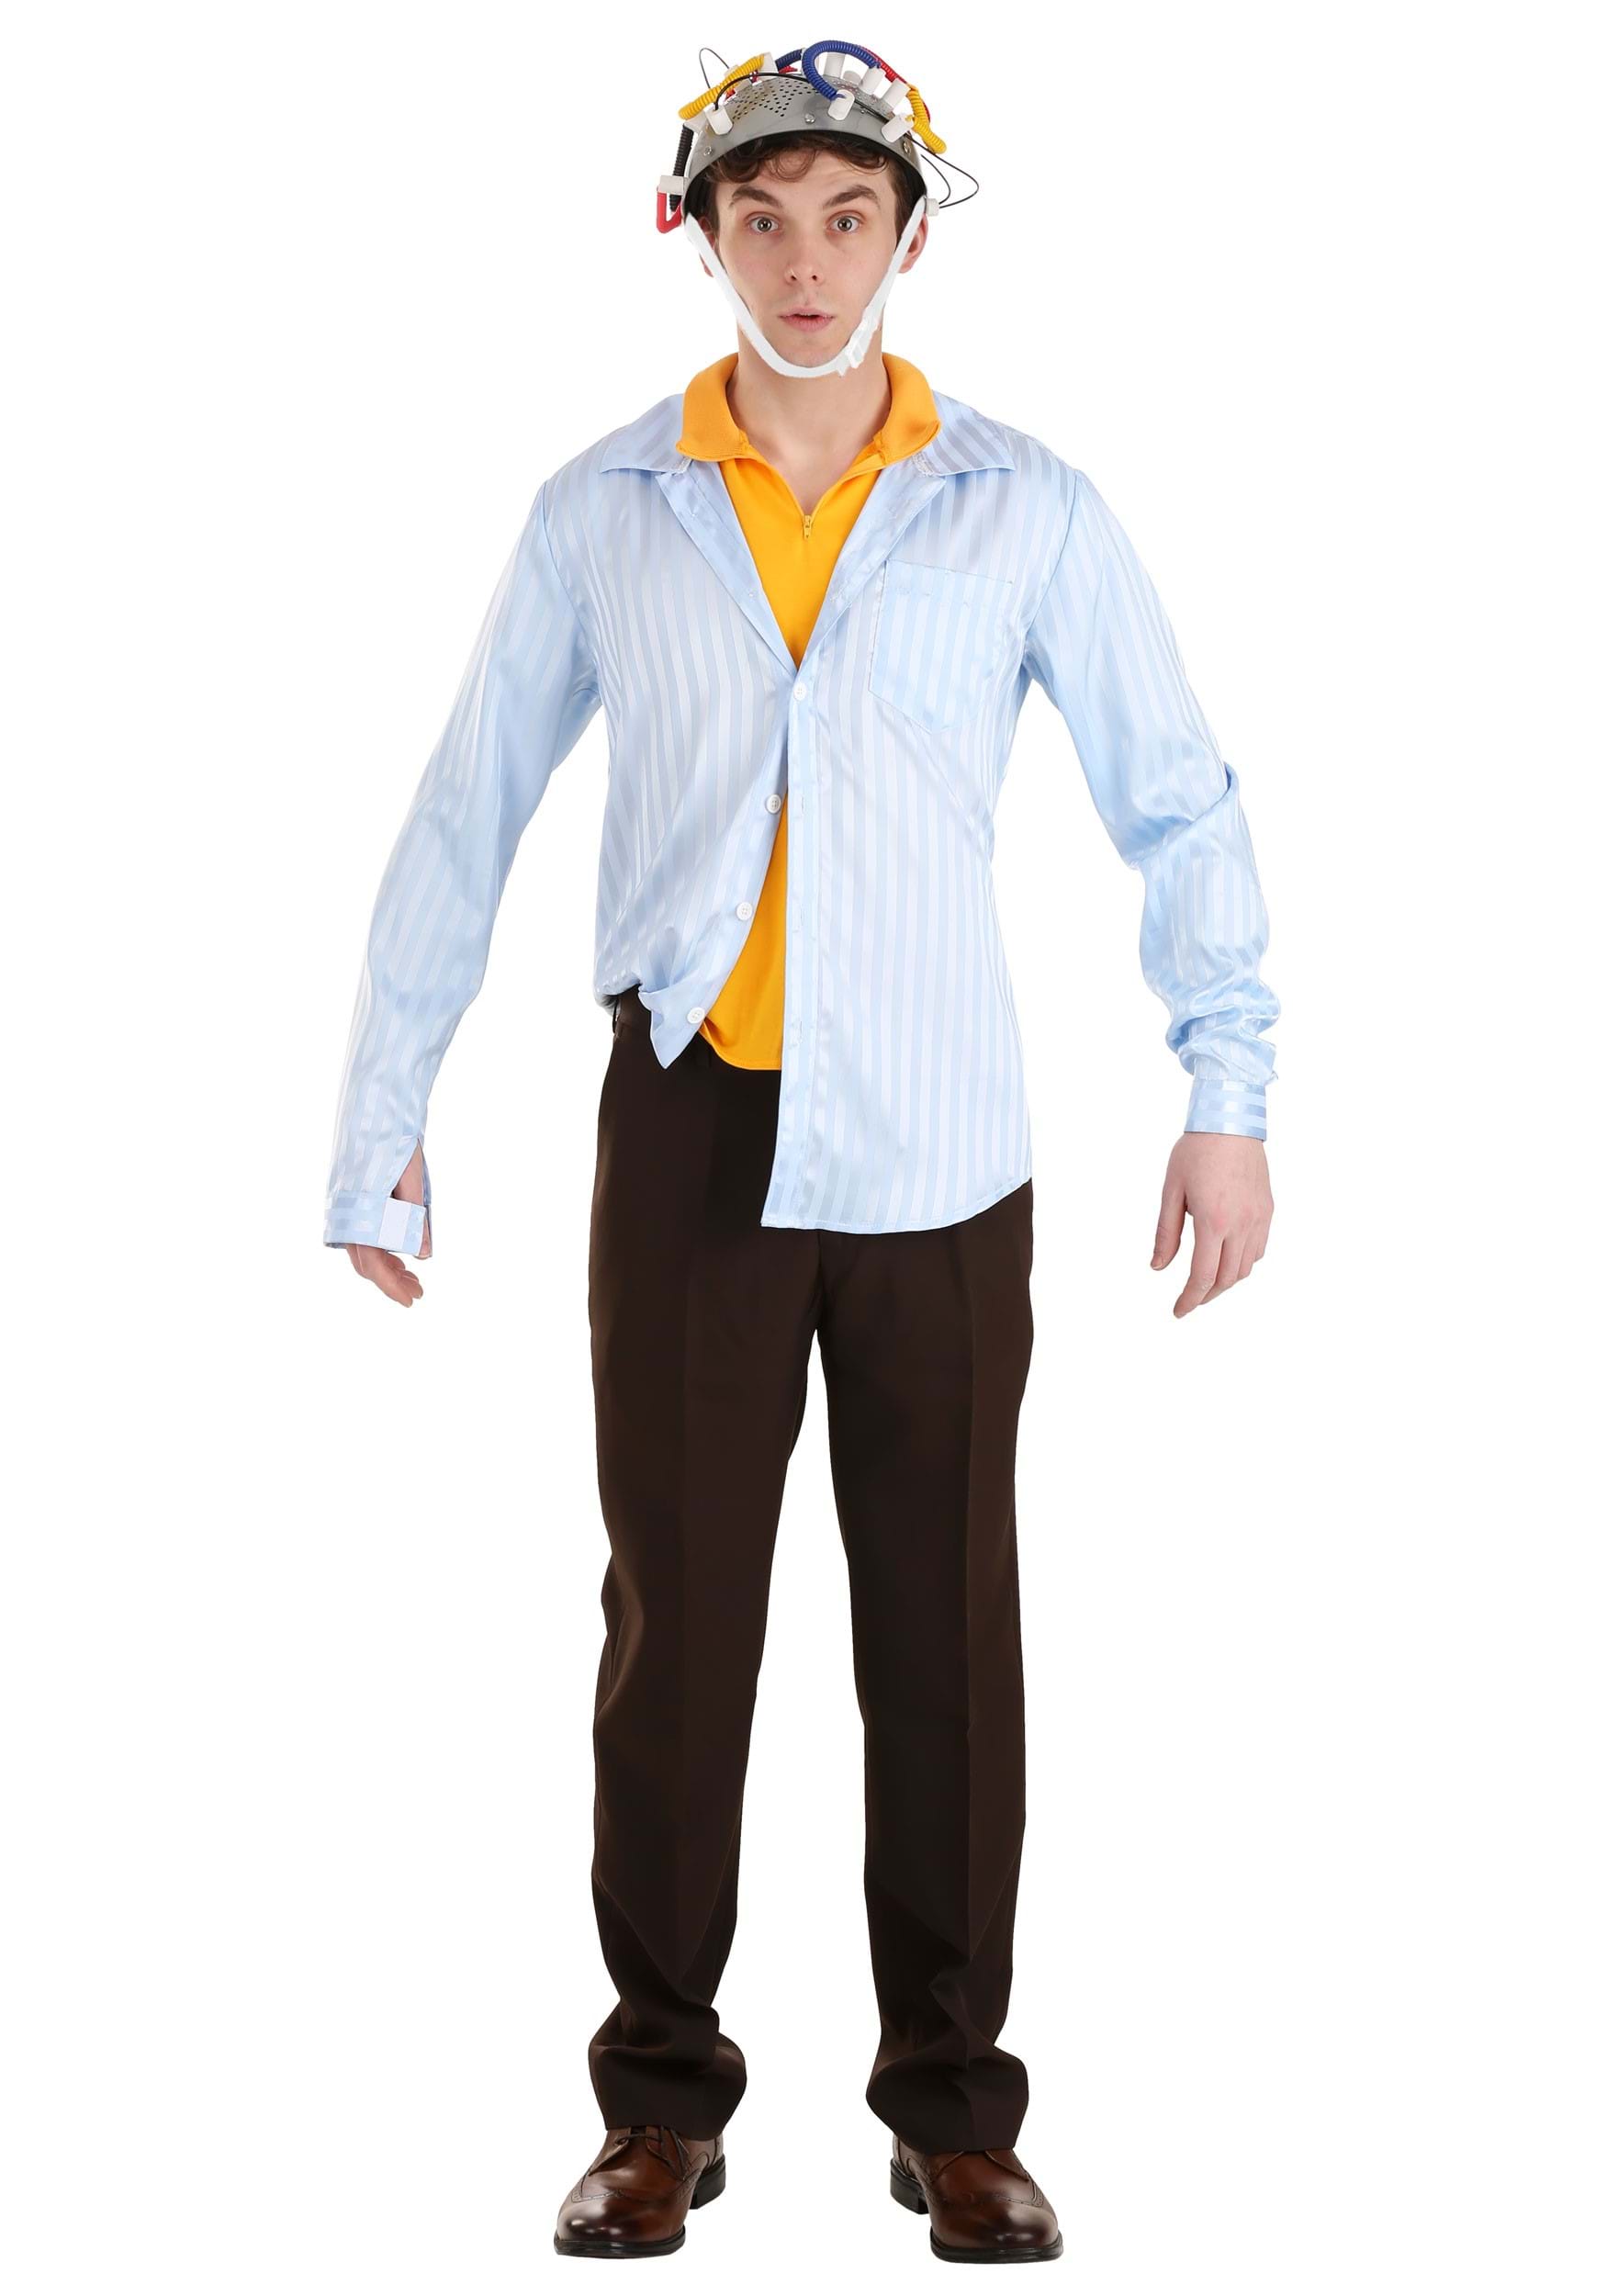 Mens Ghostbusters Tully Costume